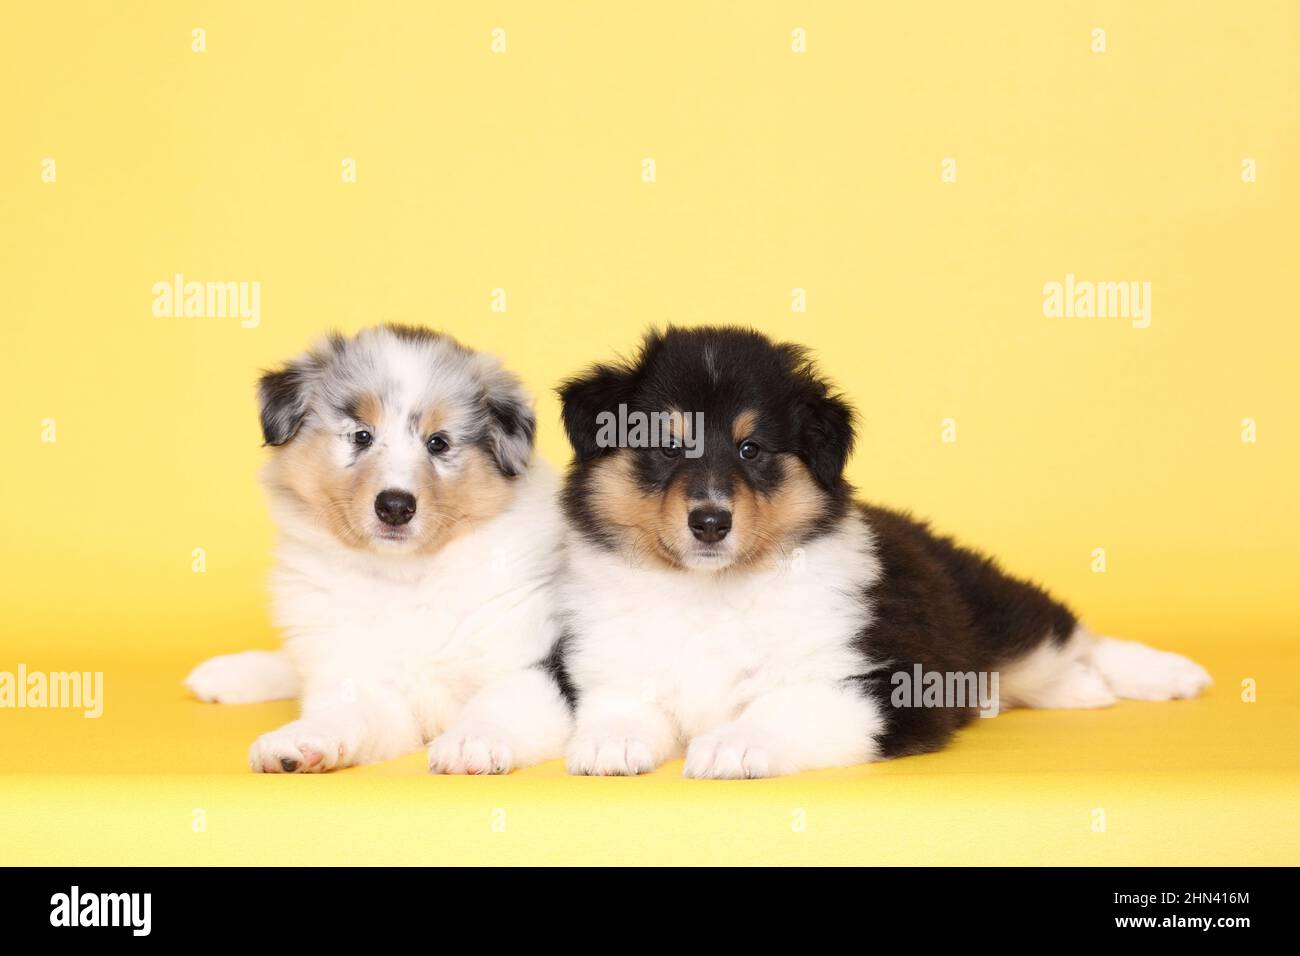 American Collie, Long-haired Collie. Two puppies lying. Studio picture against a yellow background. Germany Stock Photo